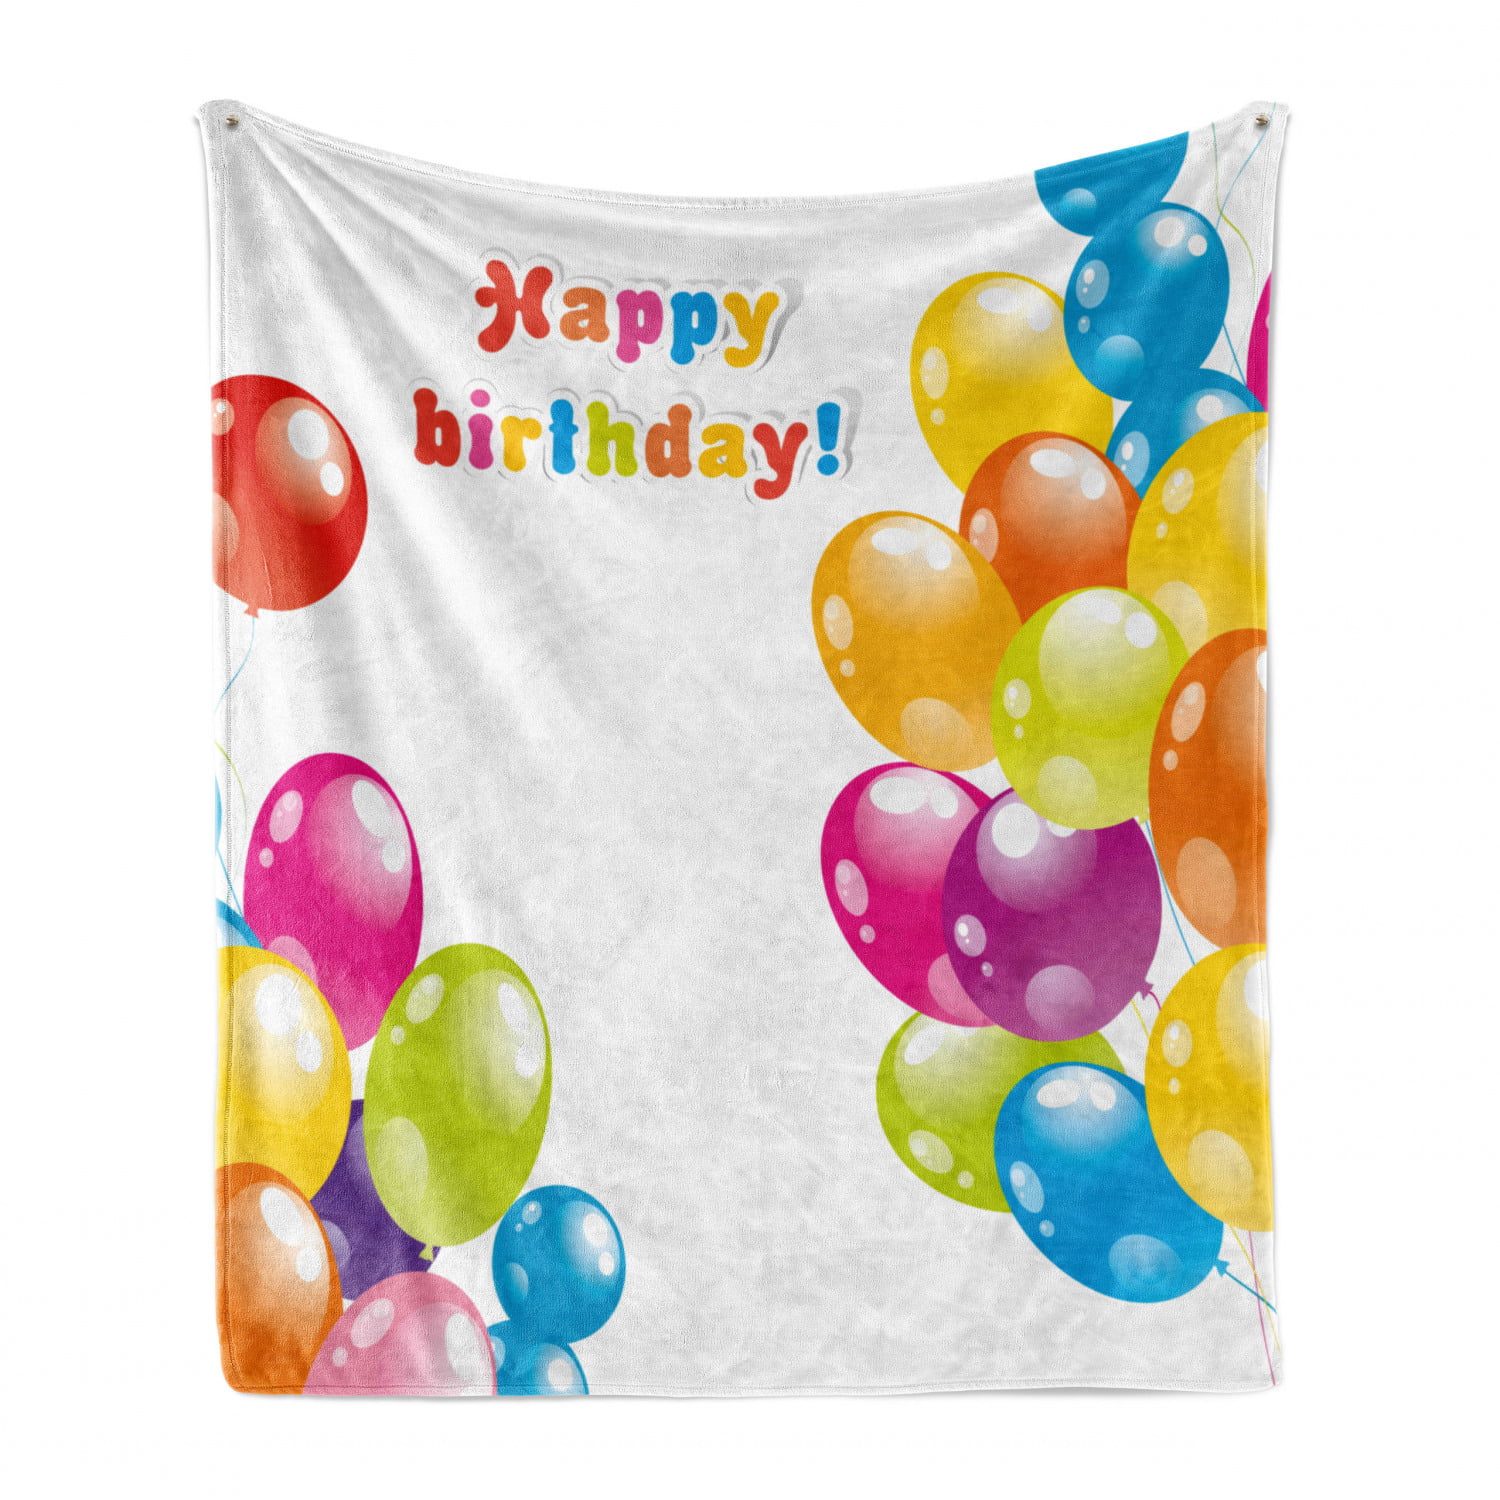 Celebration Colorful Balloons with Reflections Surprise Occasion Joyful Cozy Plush for Indoor and Outdoor Use Multicolor Ambesonne Birthday Soft Flannel Fleece Throw Blanket 50 x 60 